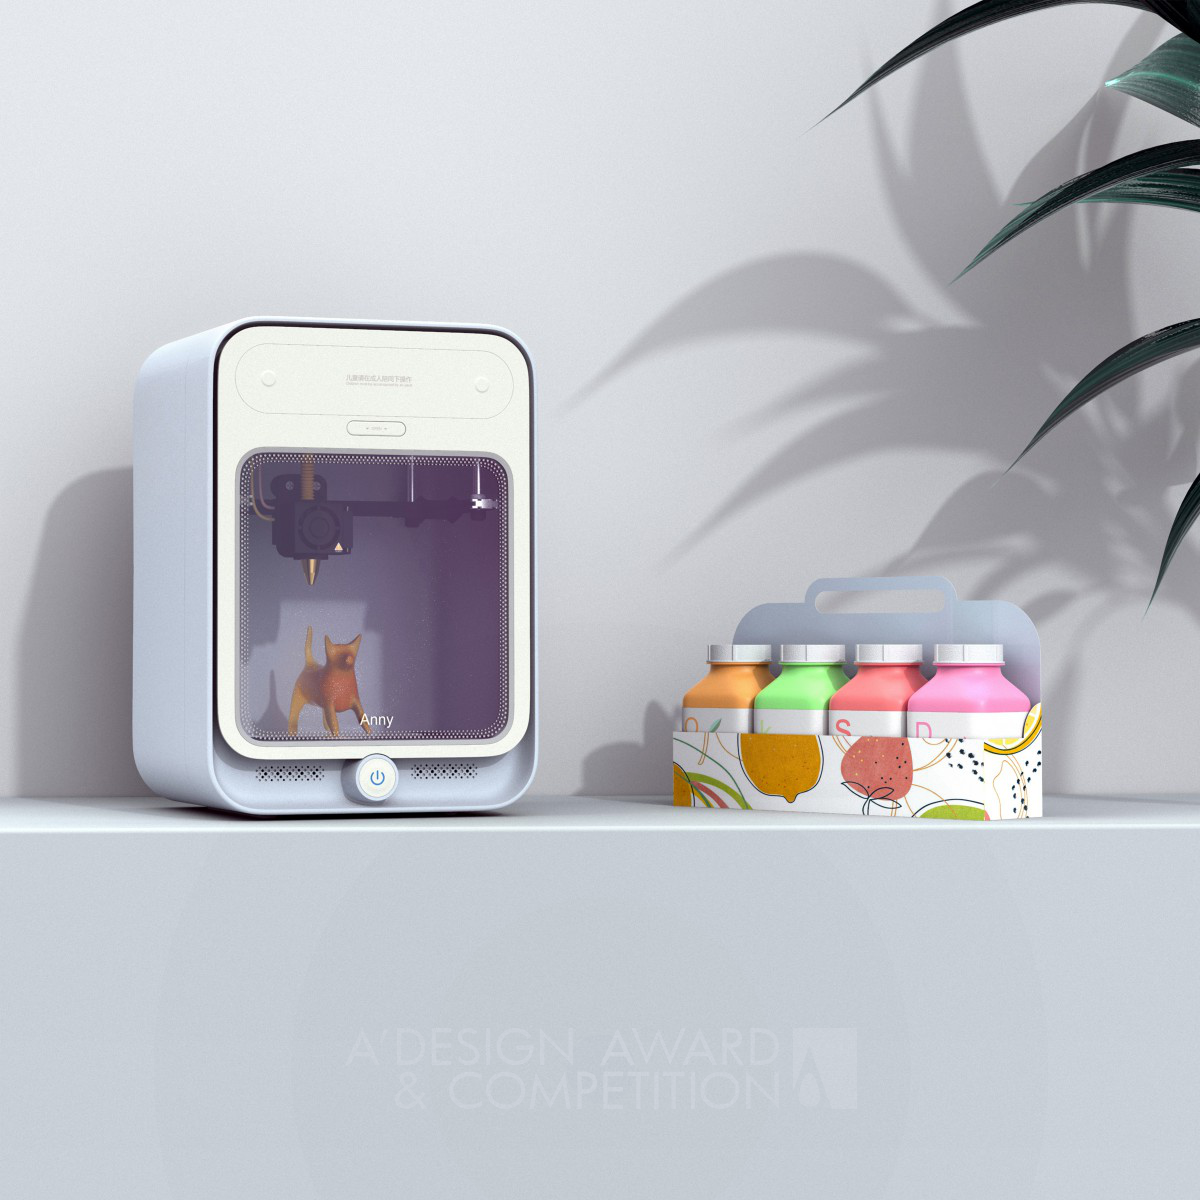 Candy 3D Printer by Anny Team